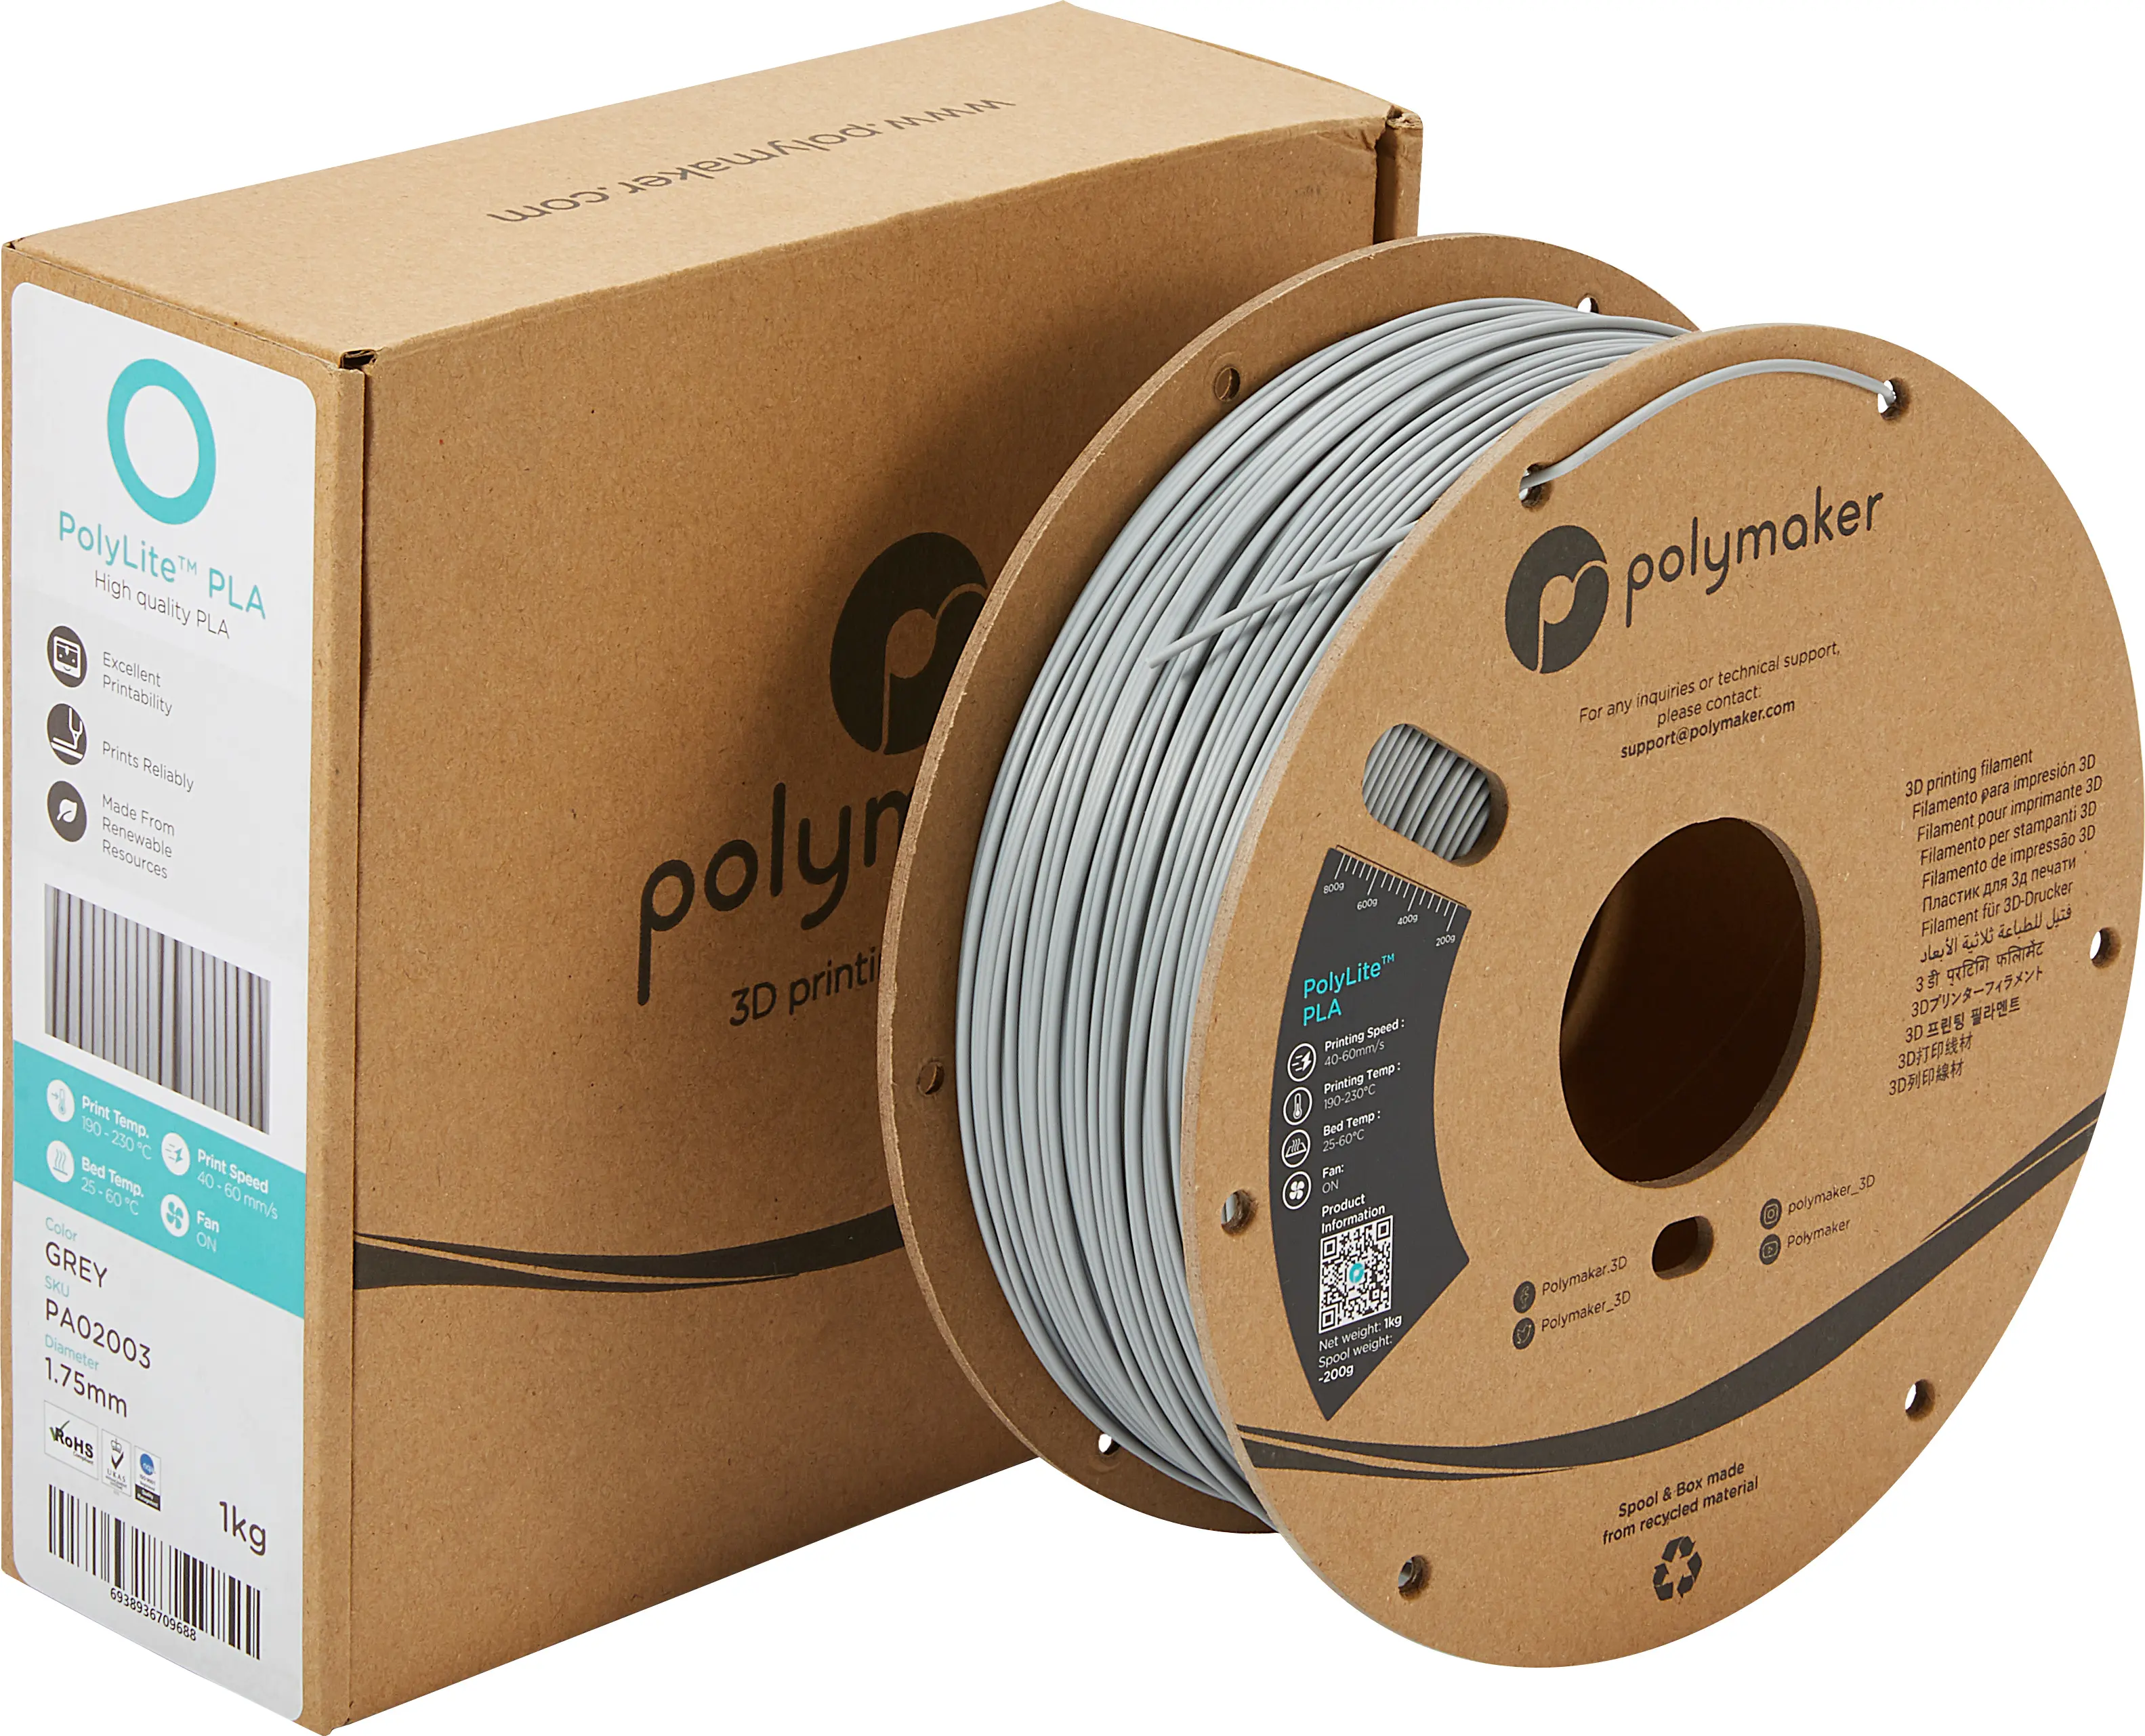 Promotion Price Prototyping Printer 1kg / 1.75mm / 2.85mm Polymaker PolyLite PLA 3D Printing Filament For Sale